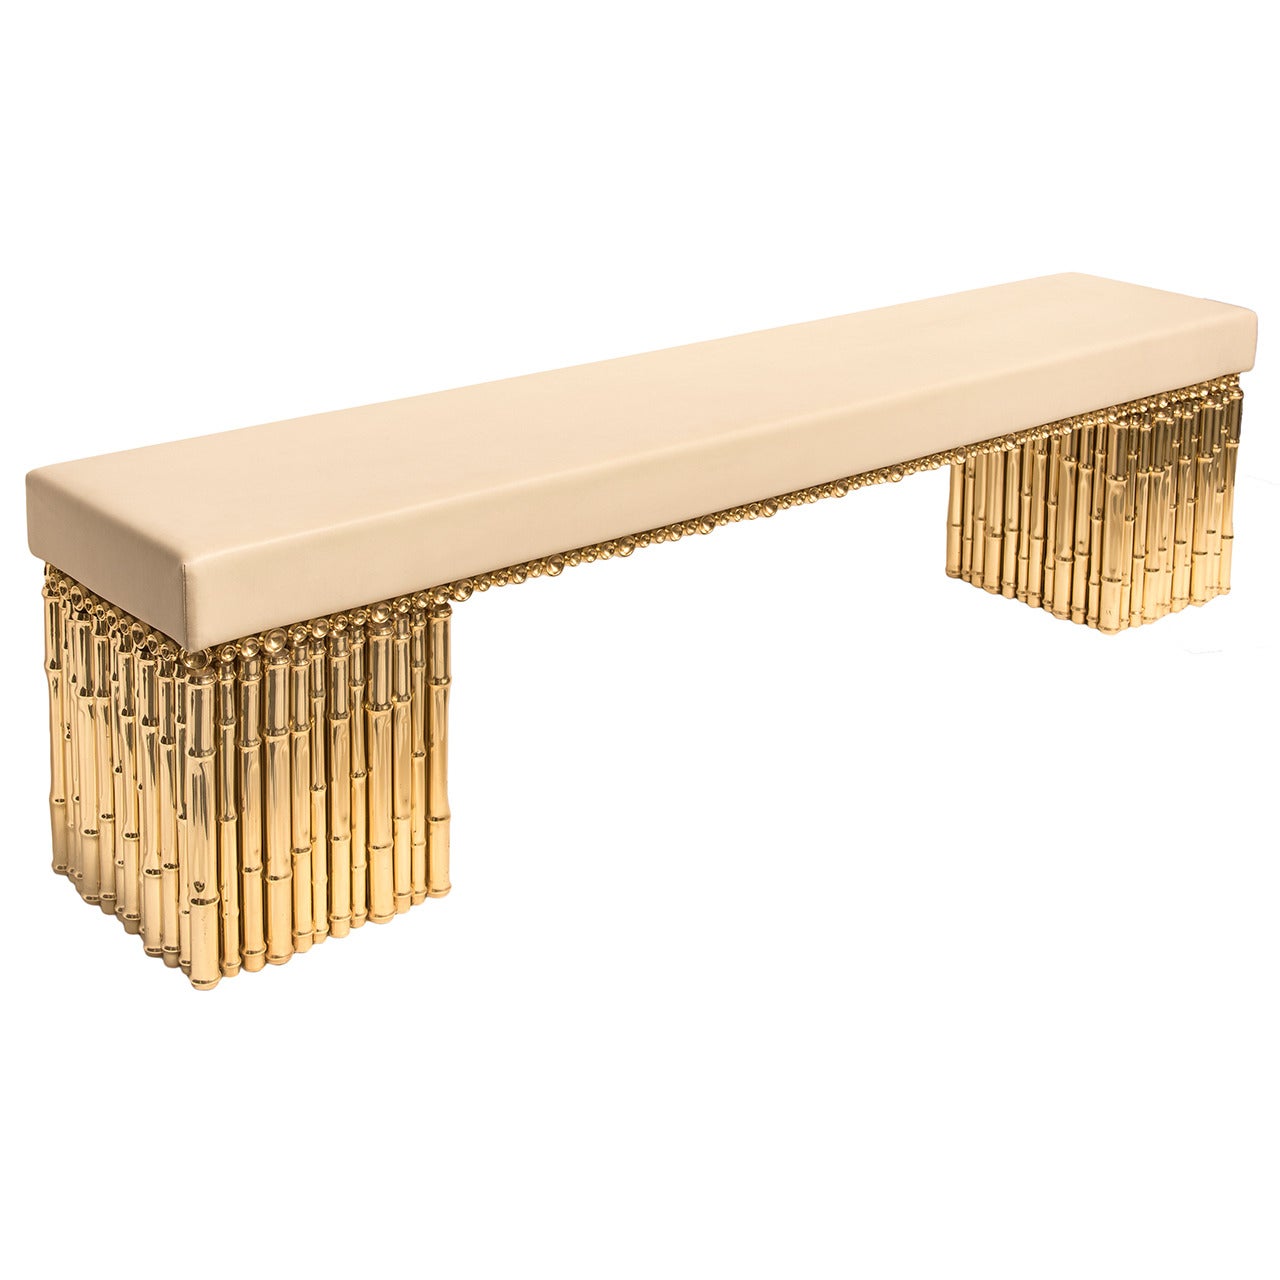 Ferruccio Laviani, Pair of Benches, Gold-Plated Brass, Italy, circa 2010